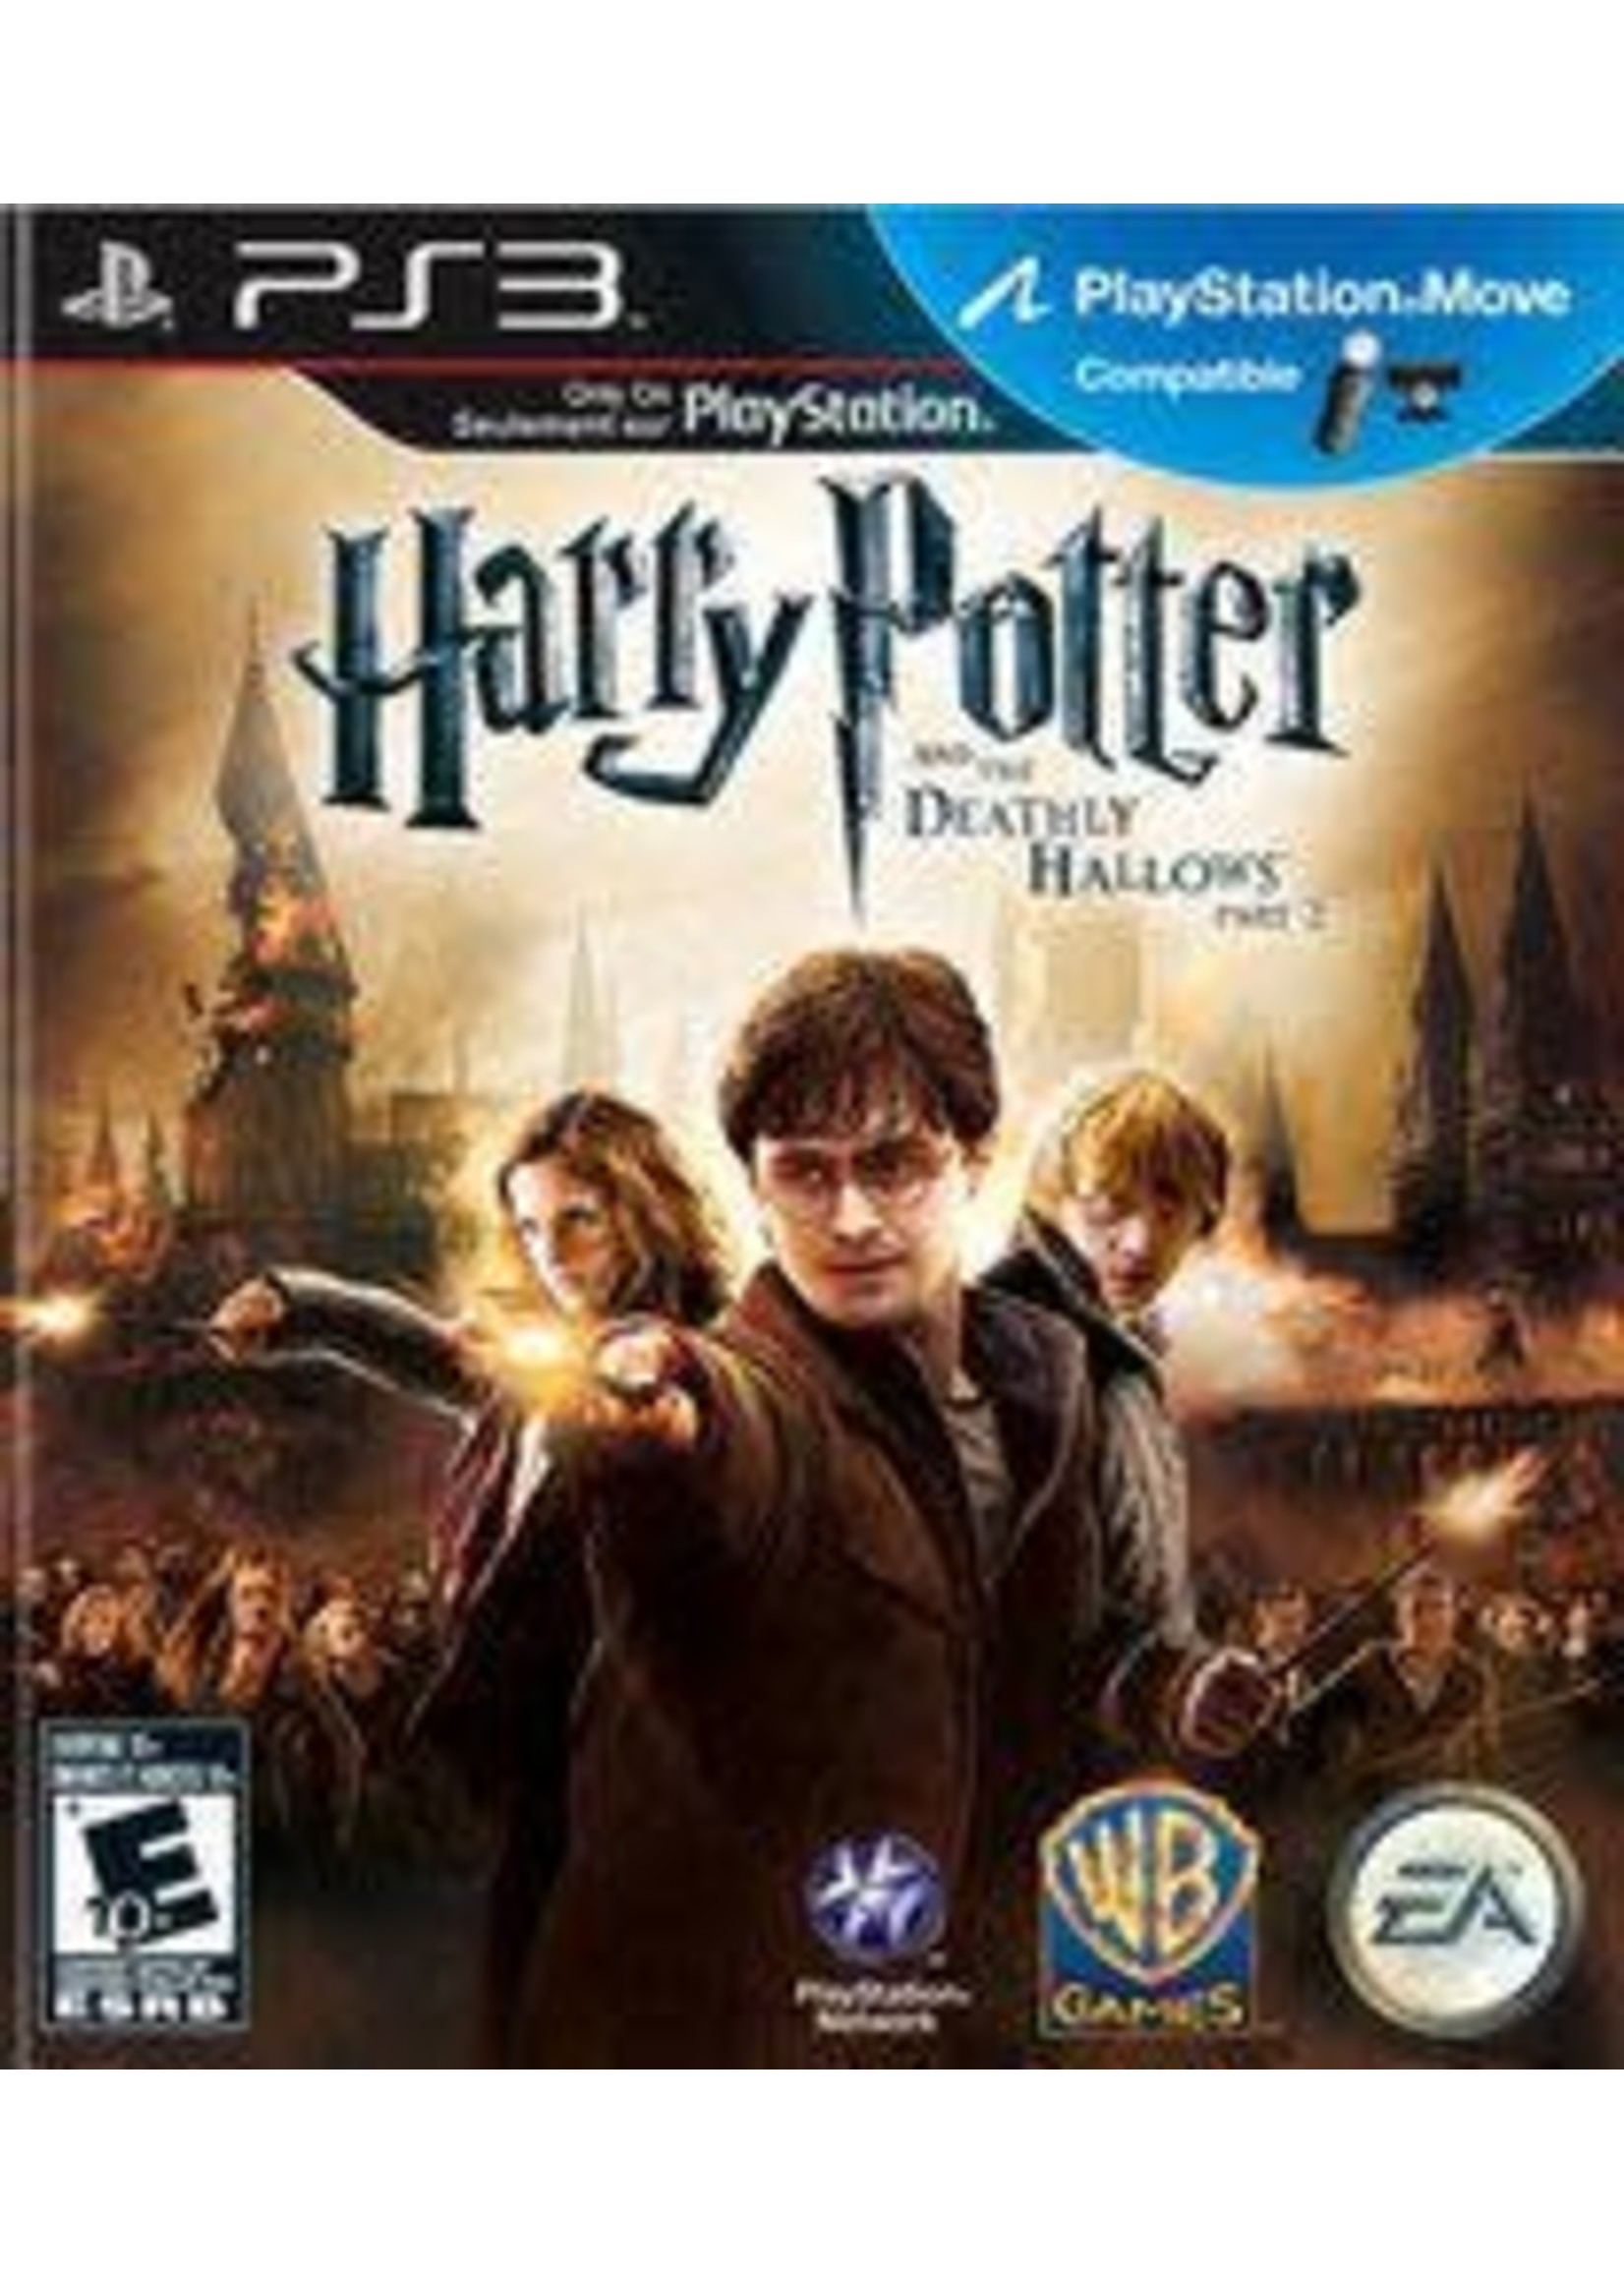 Harry Potter And The Deathly Hallows: Part 2 PS3 (CIB)